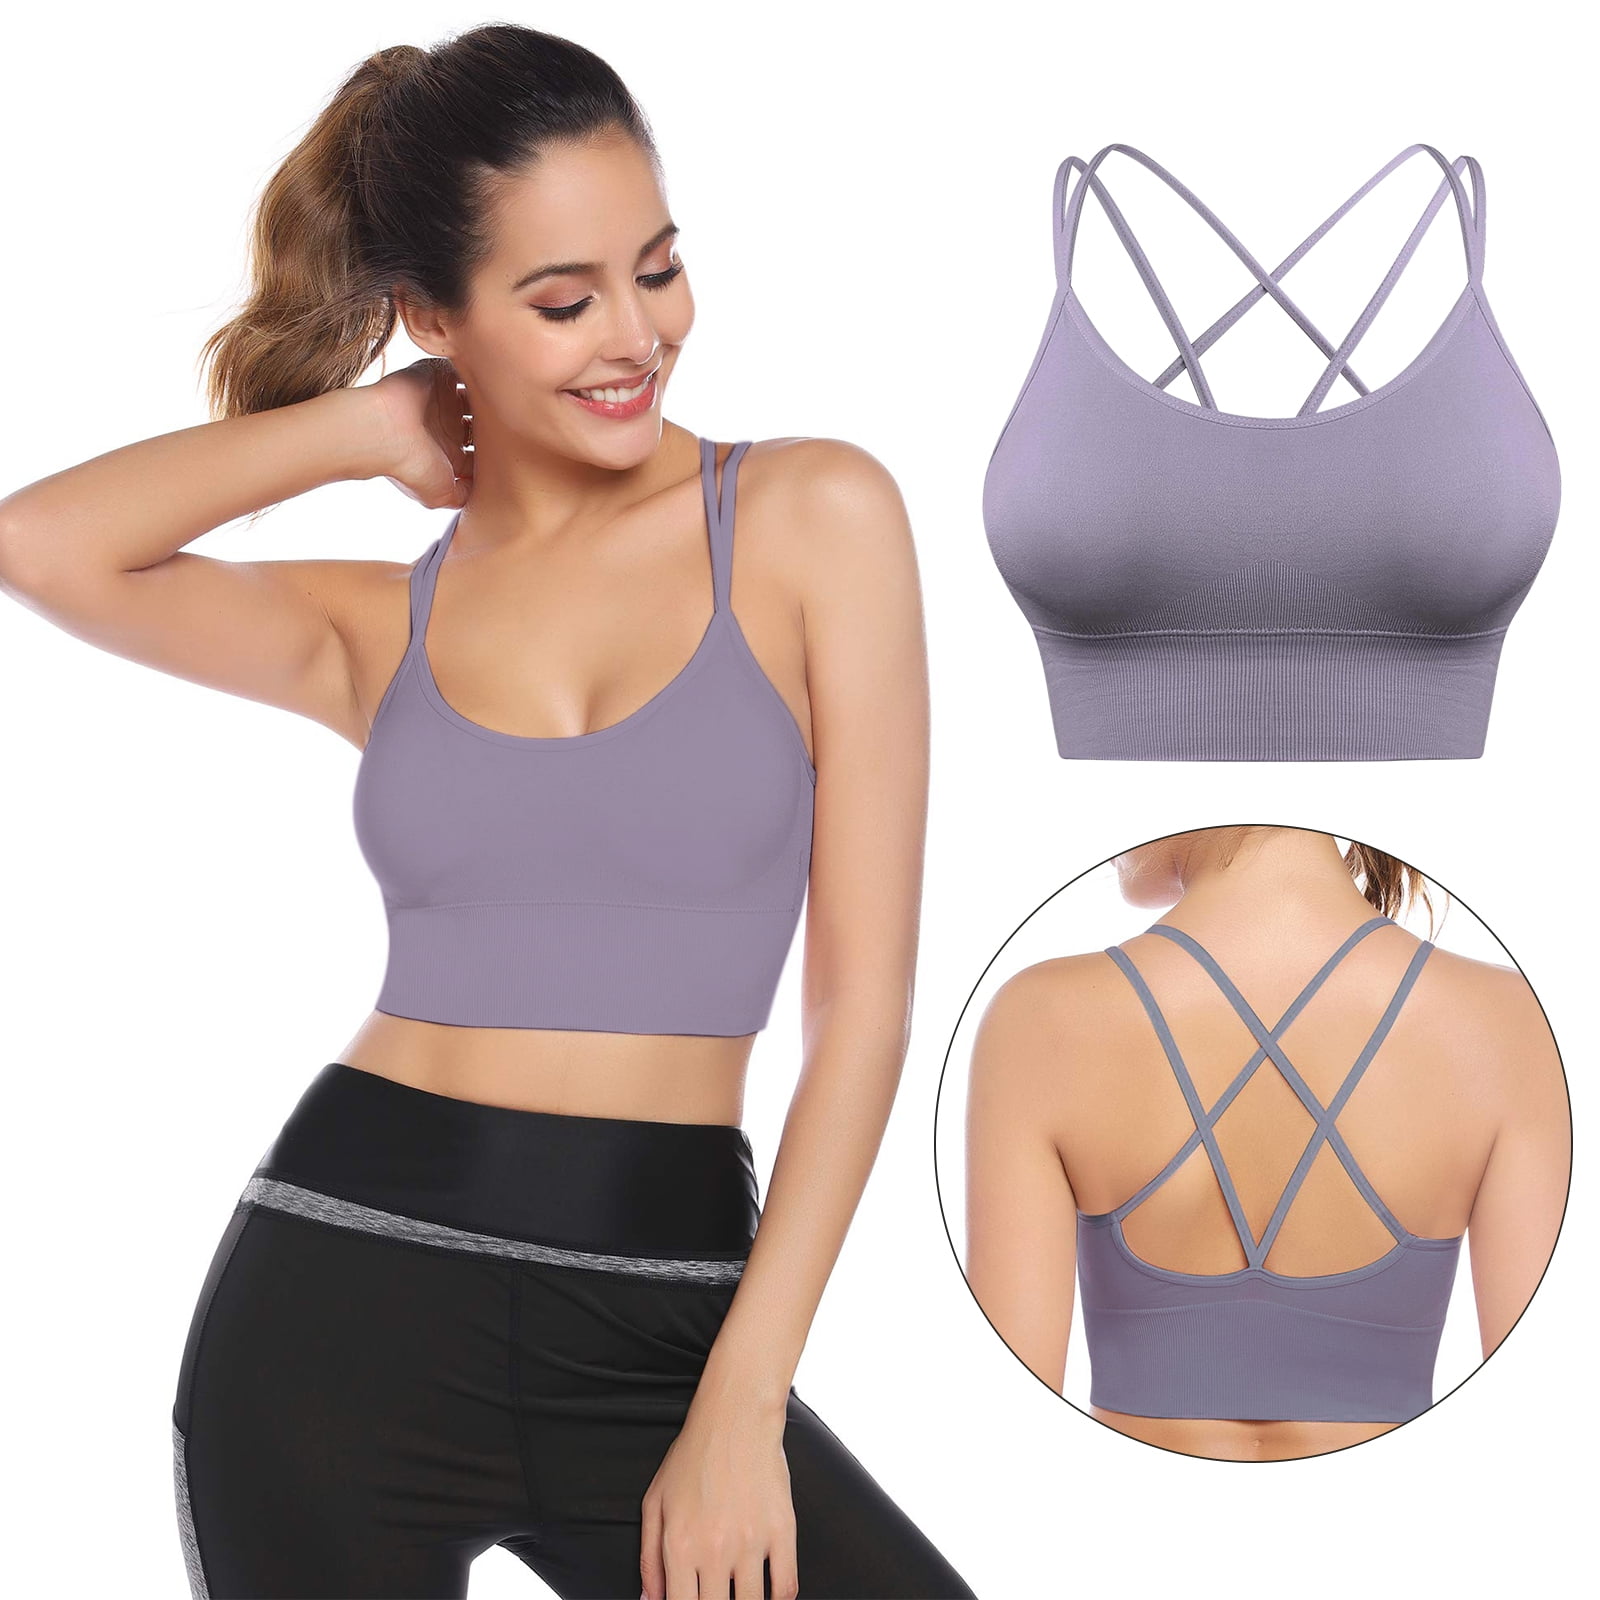 Women's Strappy Sports Bra, Criss Cross Back Bra, Padded Support Yoga Bra  for Indoor Outdoor Running Fitness, XL Size, 2 Pack 